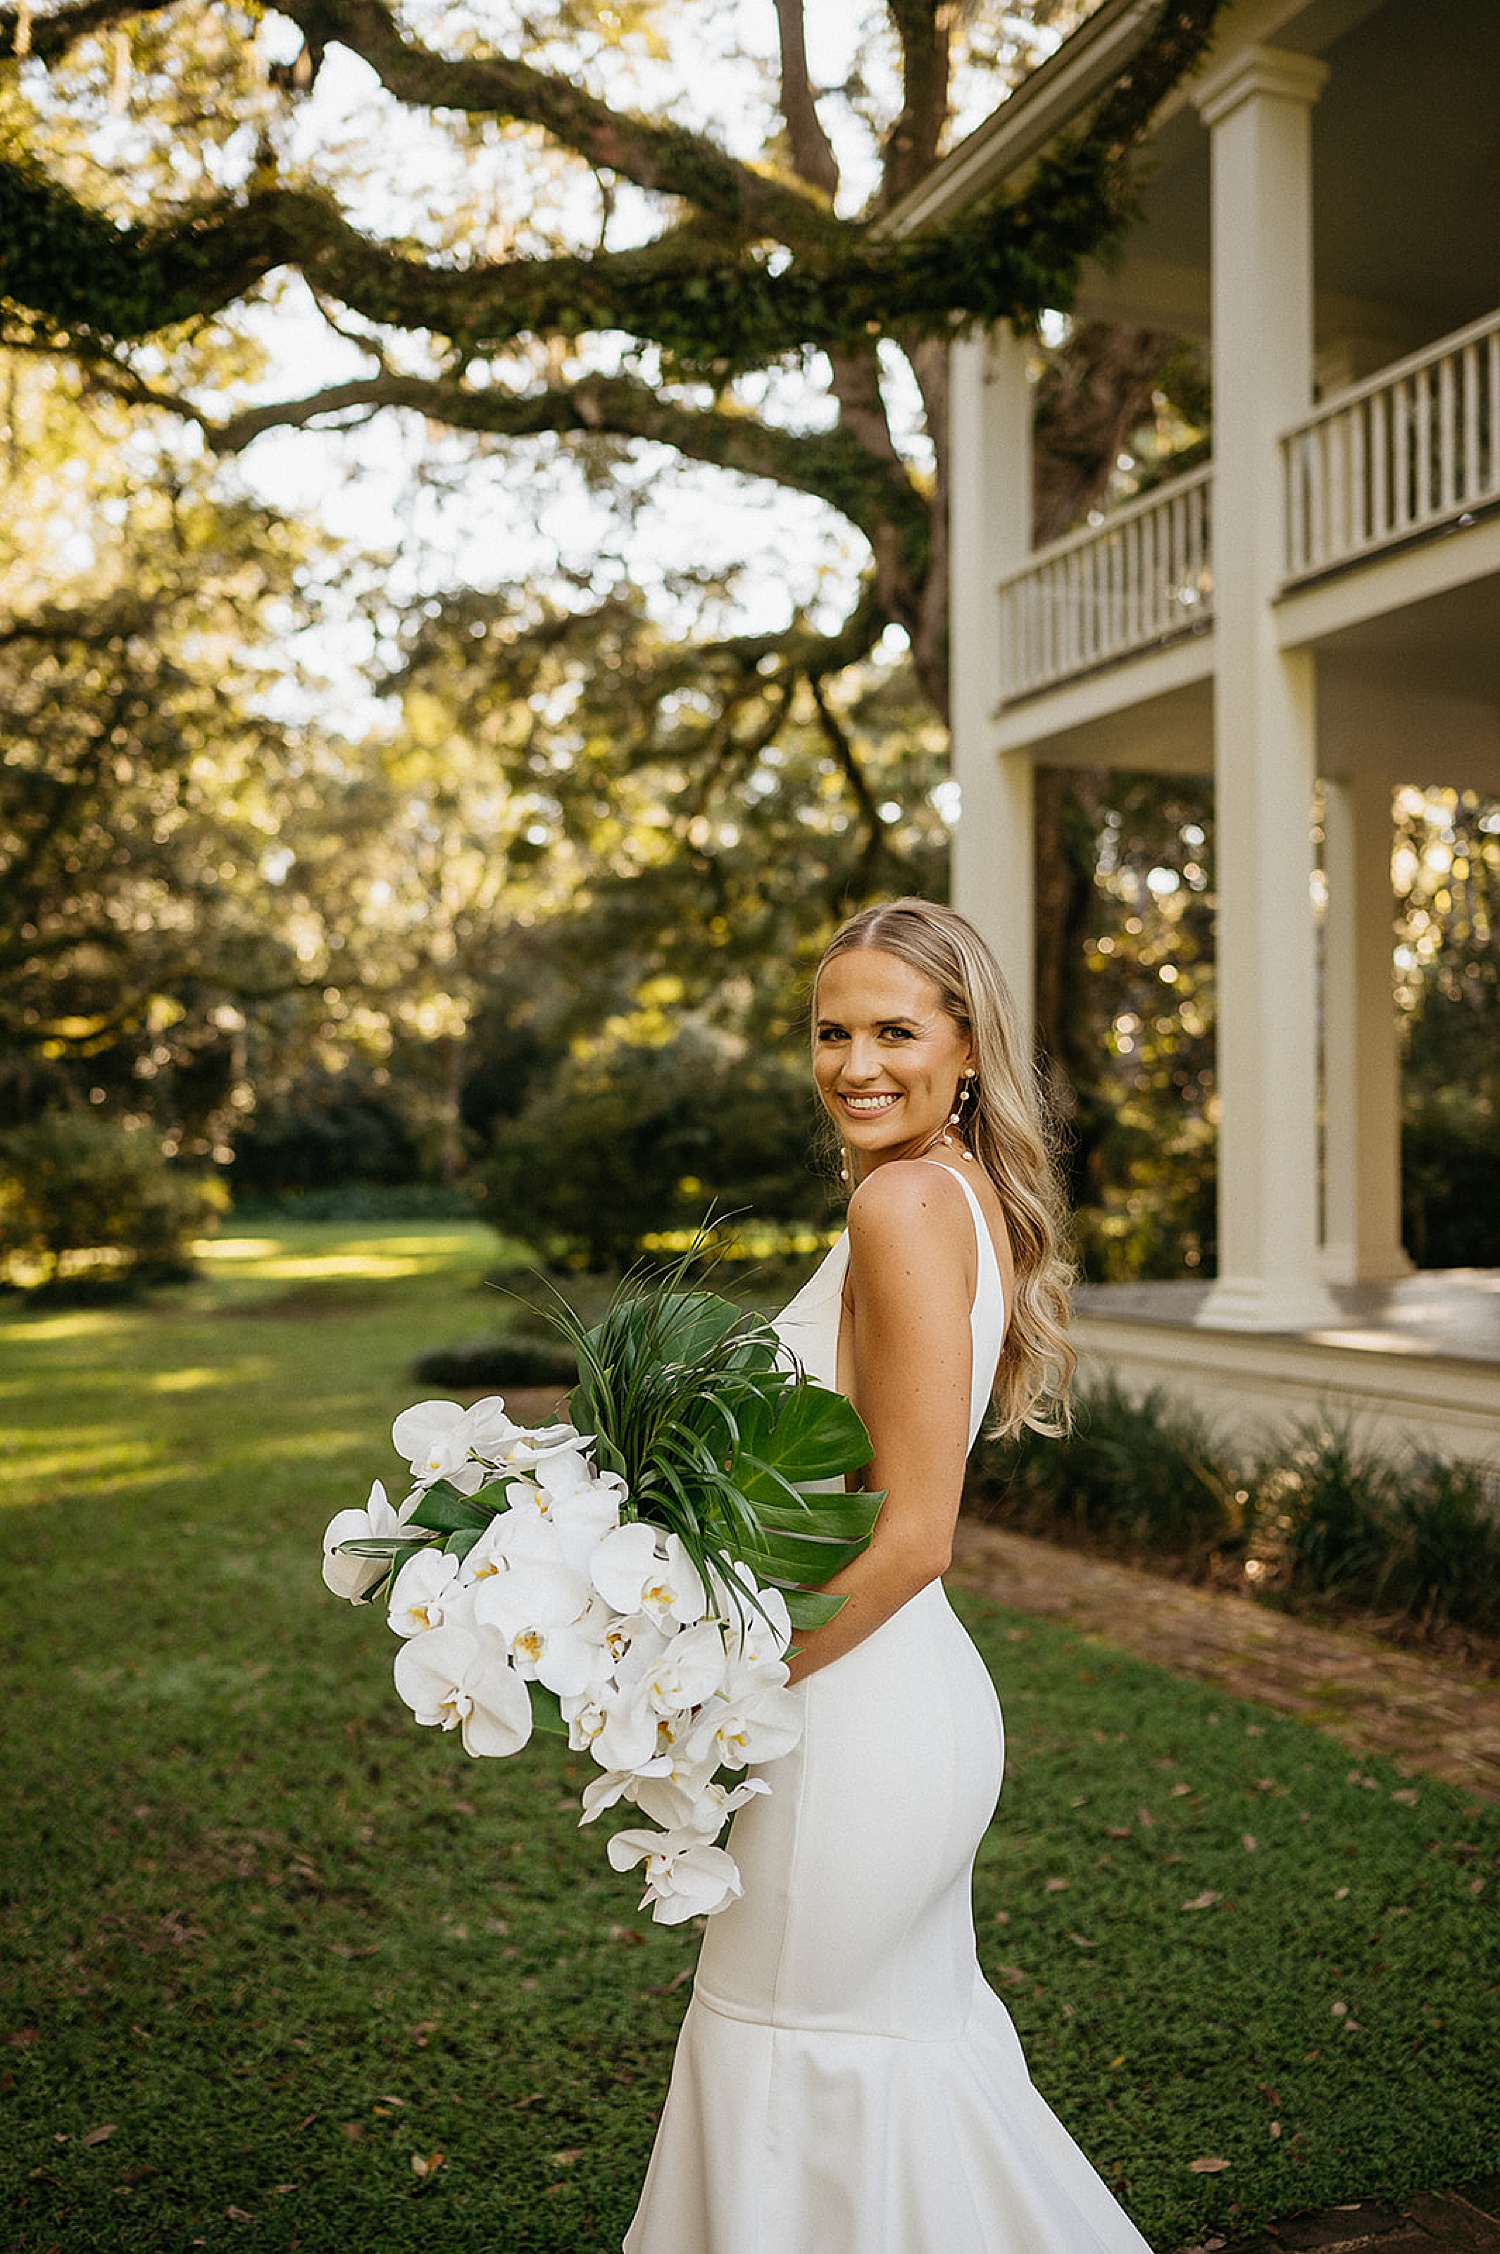 Bride wearing wedding dress holding white and green bouquet with orchids and palm leaves 